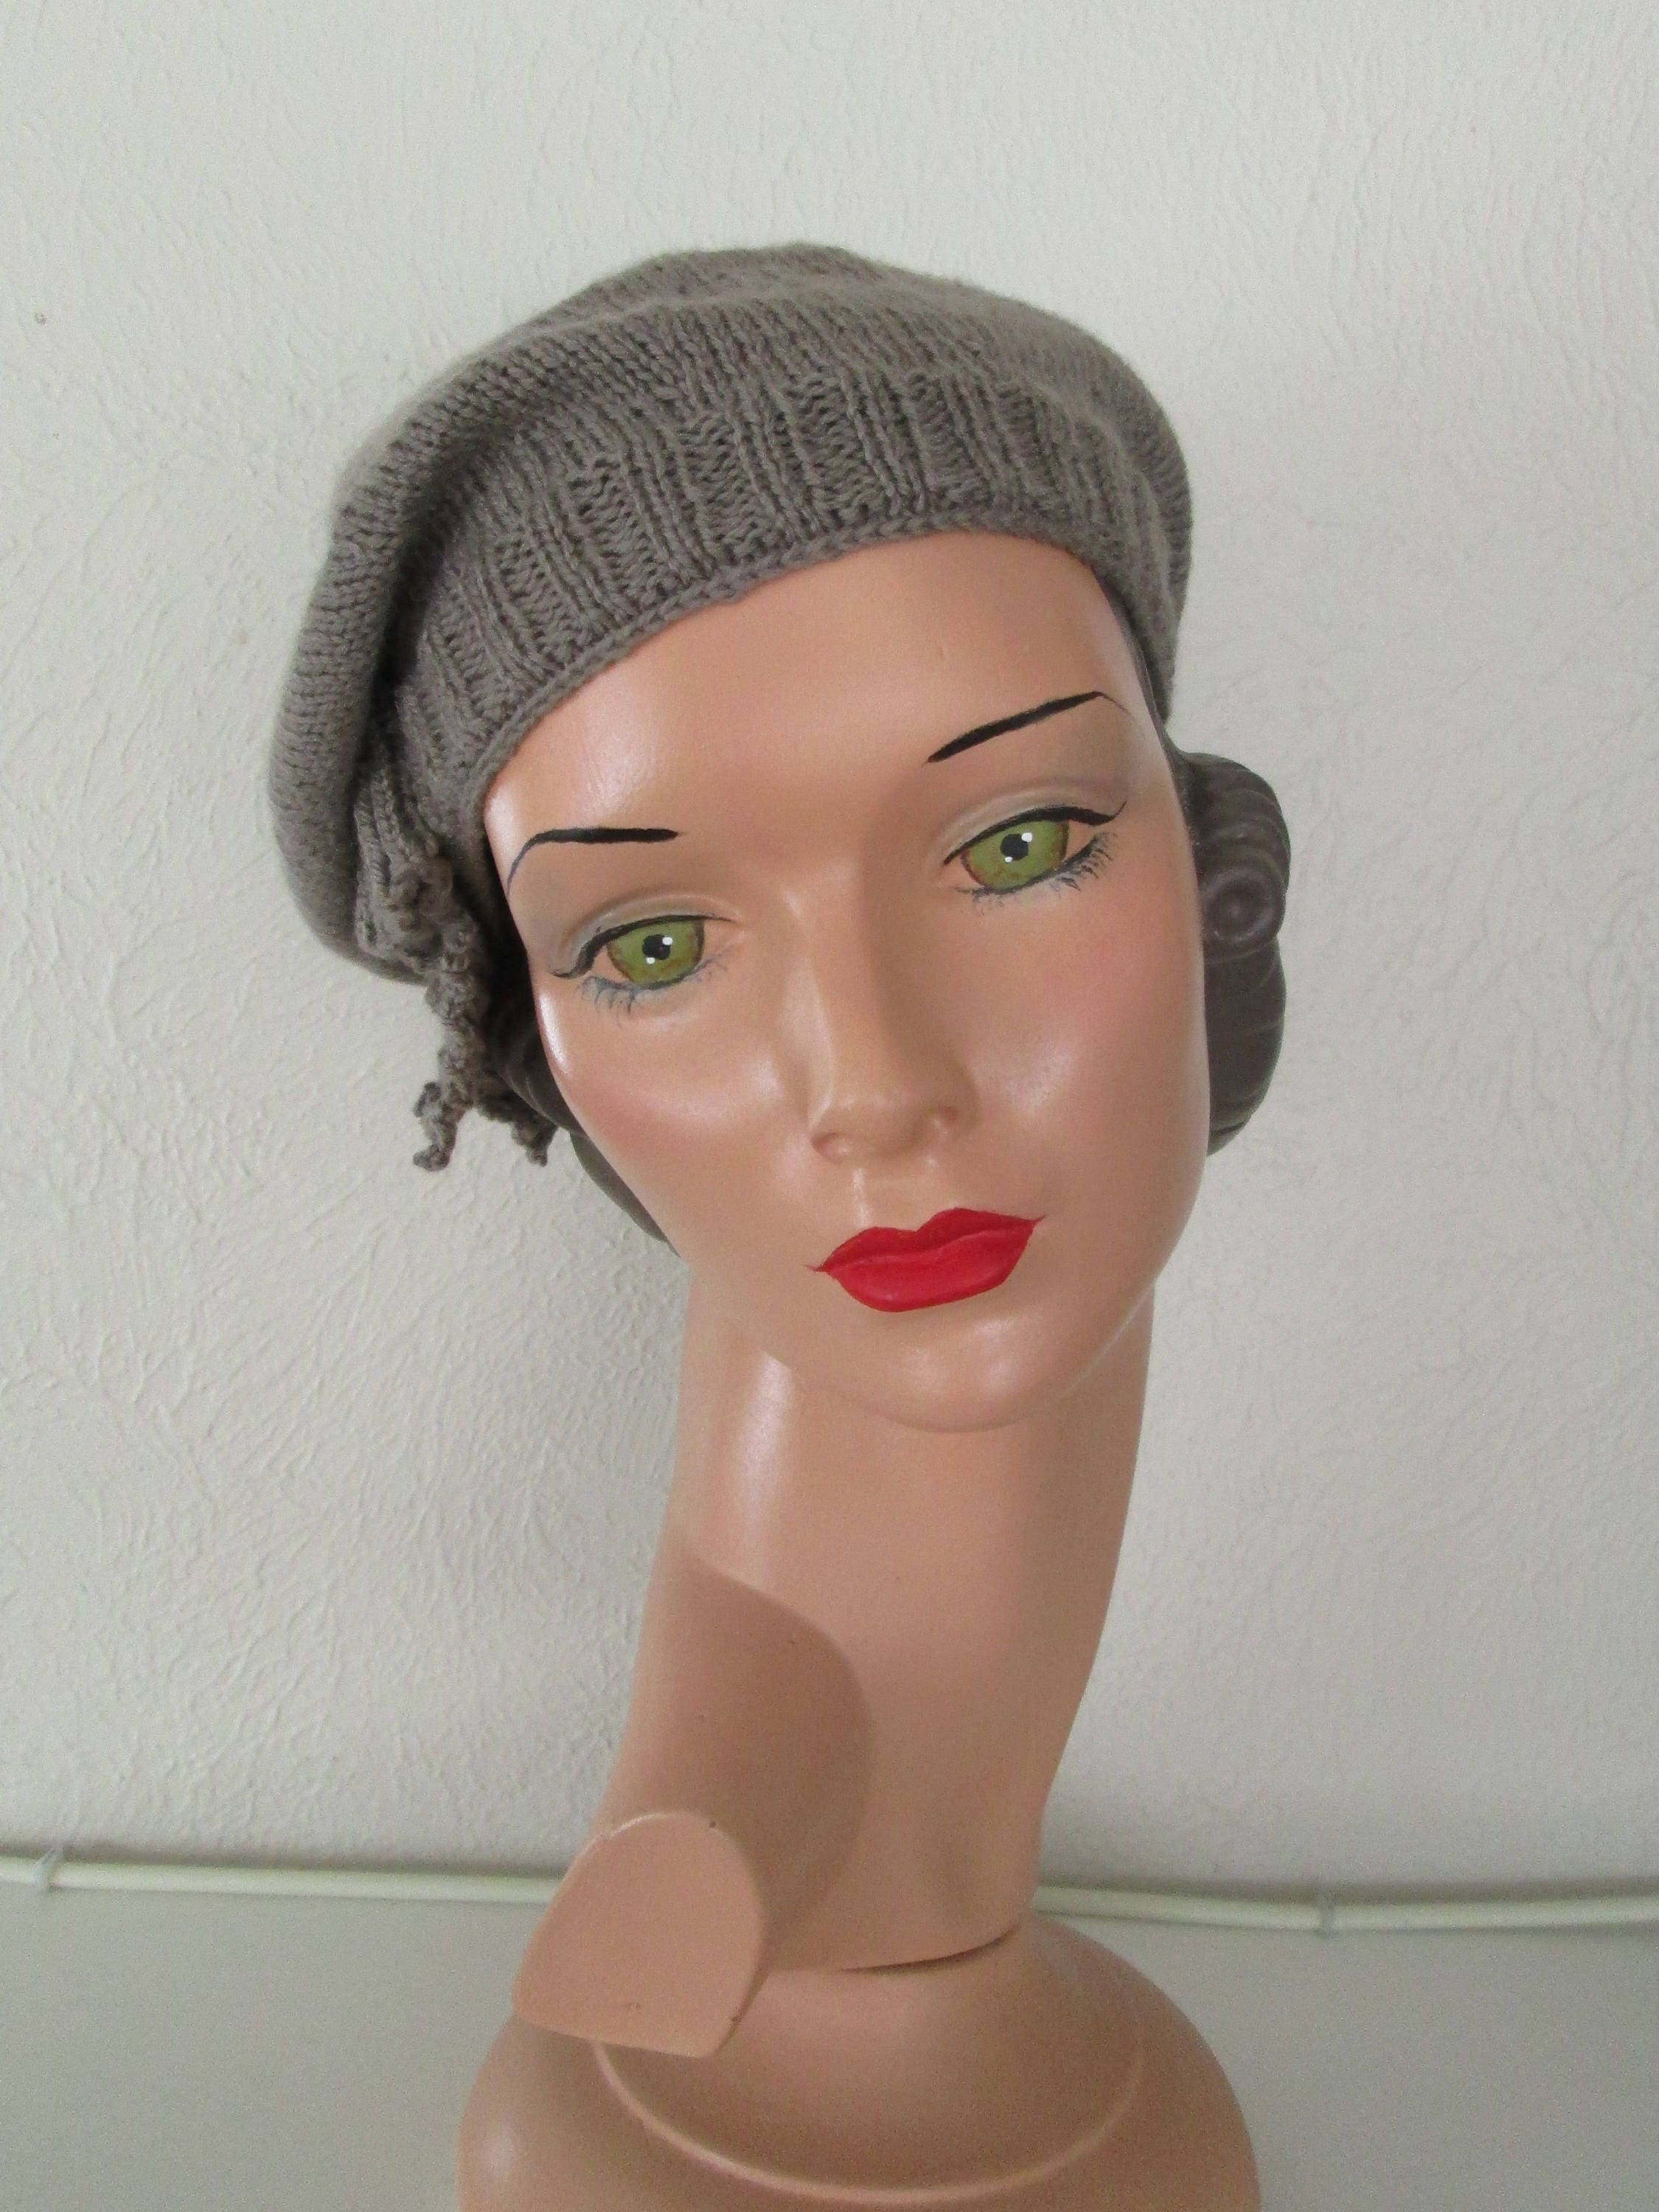 Hand Knit Pixie Hat Vintage 1930's Downton Abbey Style Pure Wool